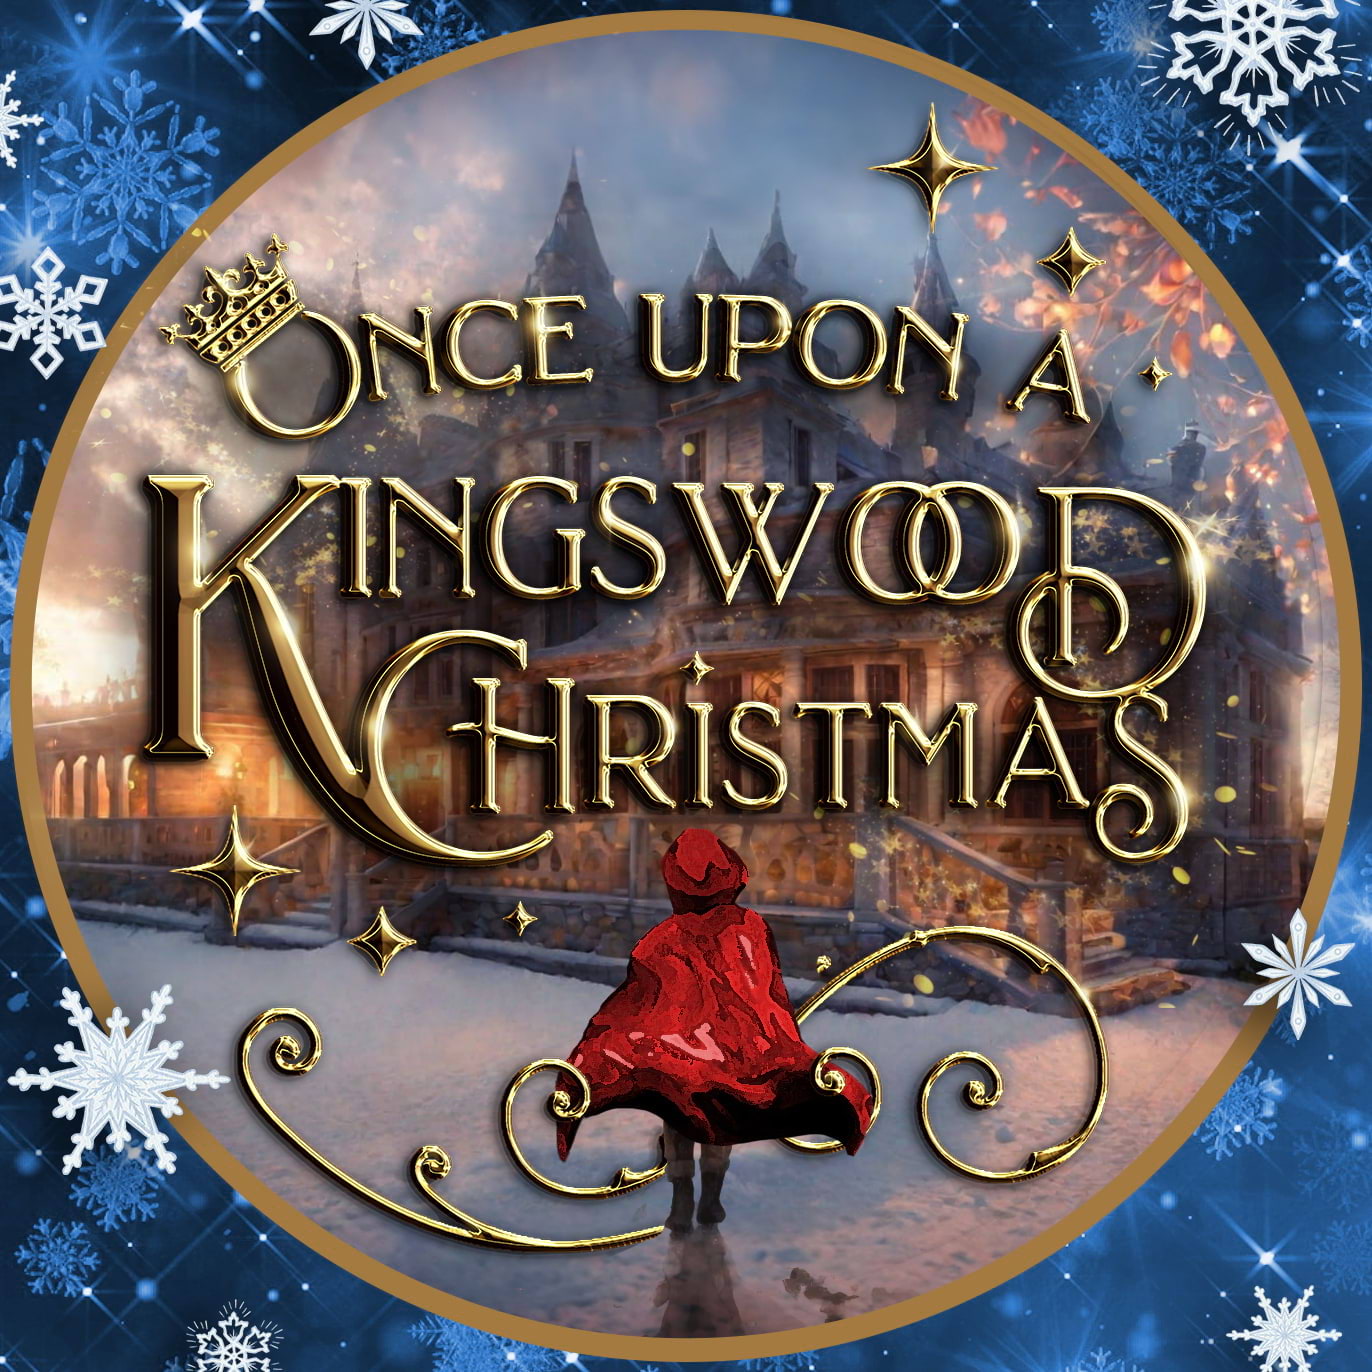 Rescue Father Christmas on this family-friendly adventure in a Victorian mansion